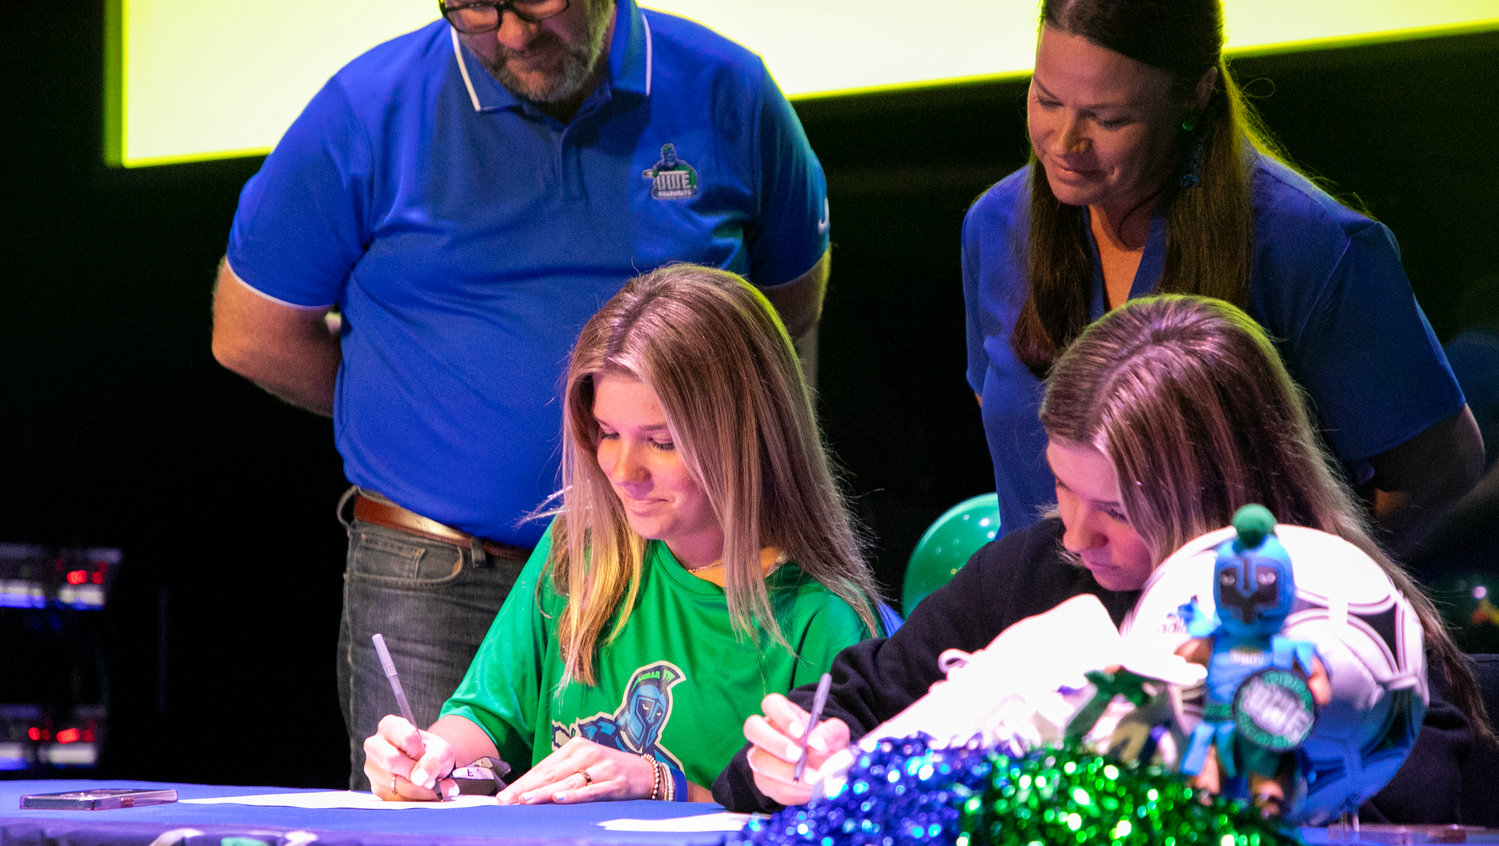 Addison and Emily Smith put pen to paper and sign their National Letters of Intent to join the West Florida Argonauts soccer team after their final season with the Fairhope Pirates during a signing ceremony at 3Circle Church in Fairhope Thursday, Nov. 10.